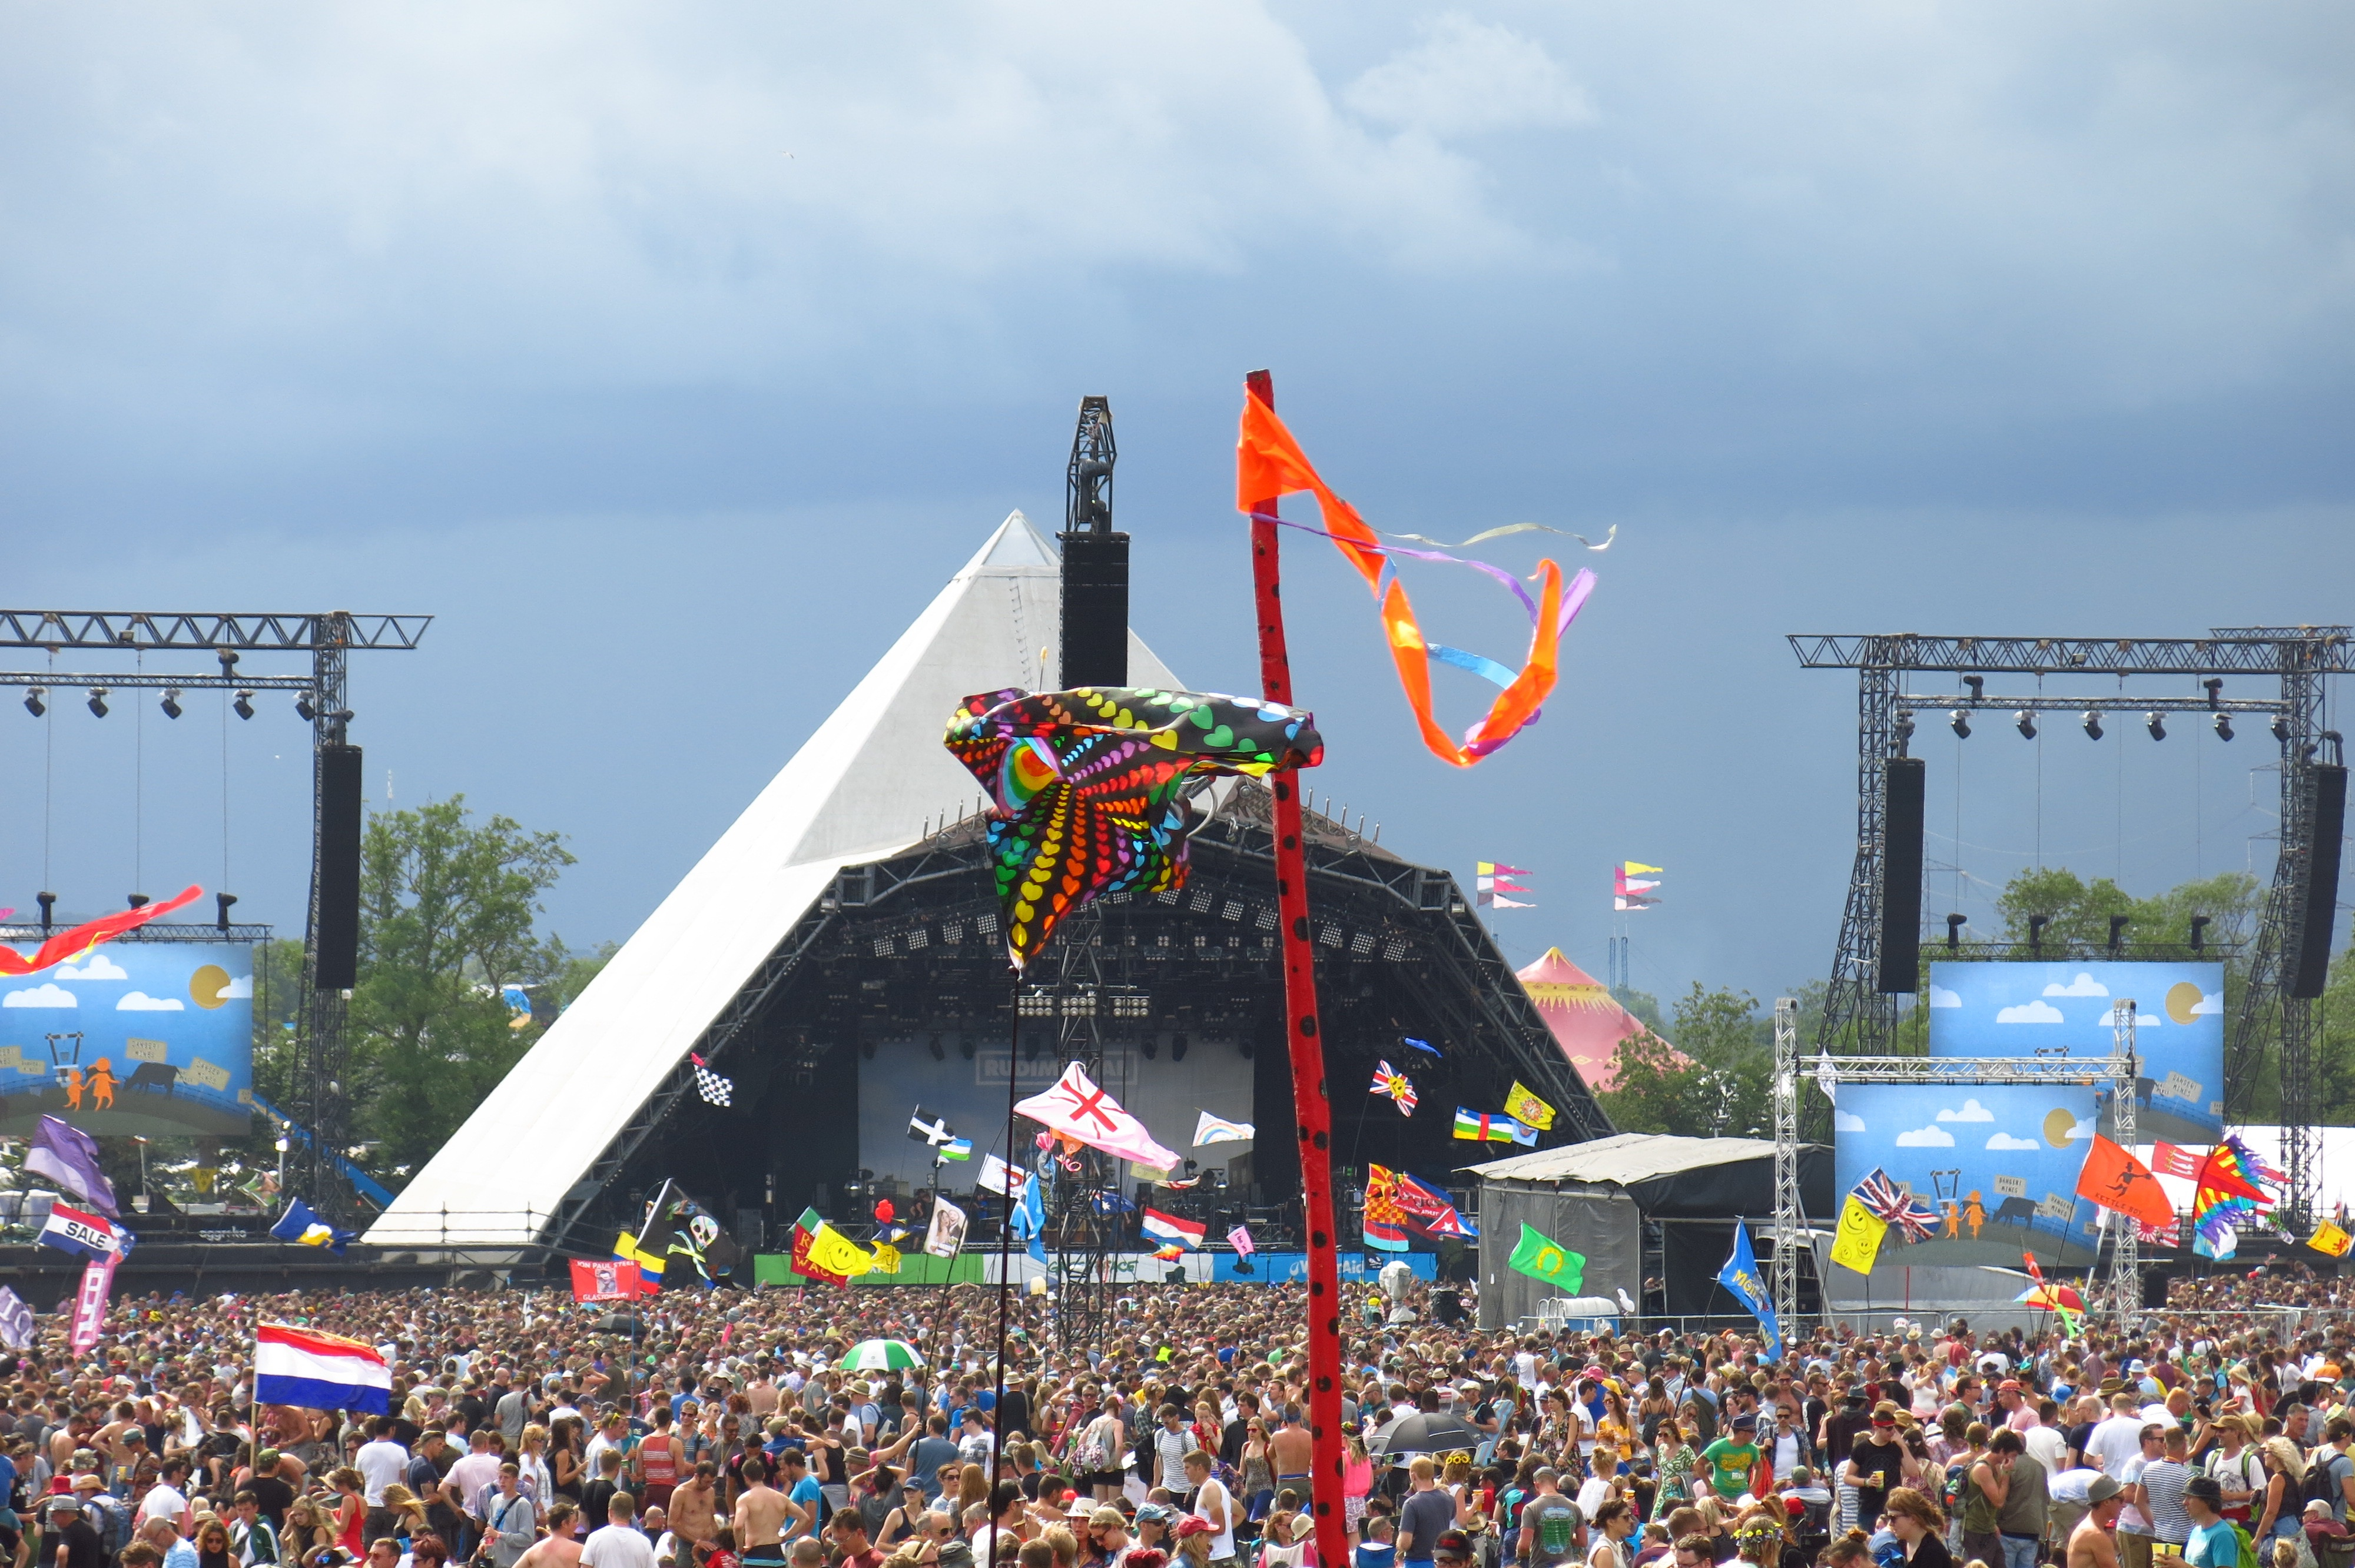 Bosses are still looking for someone to close the festival on the Pyramid Stage